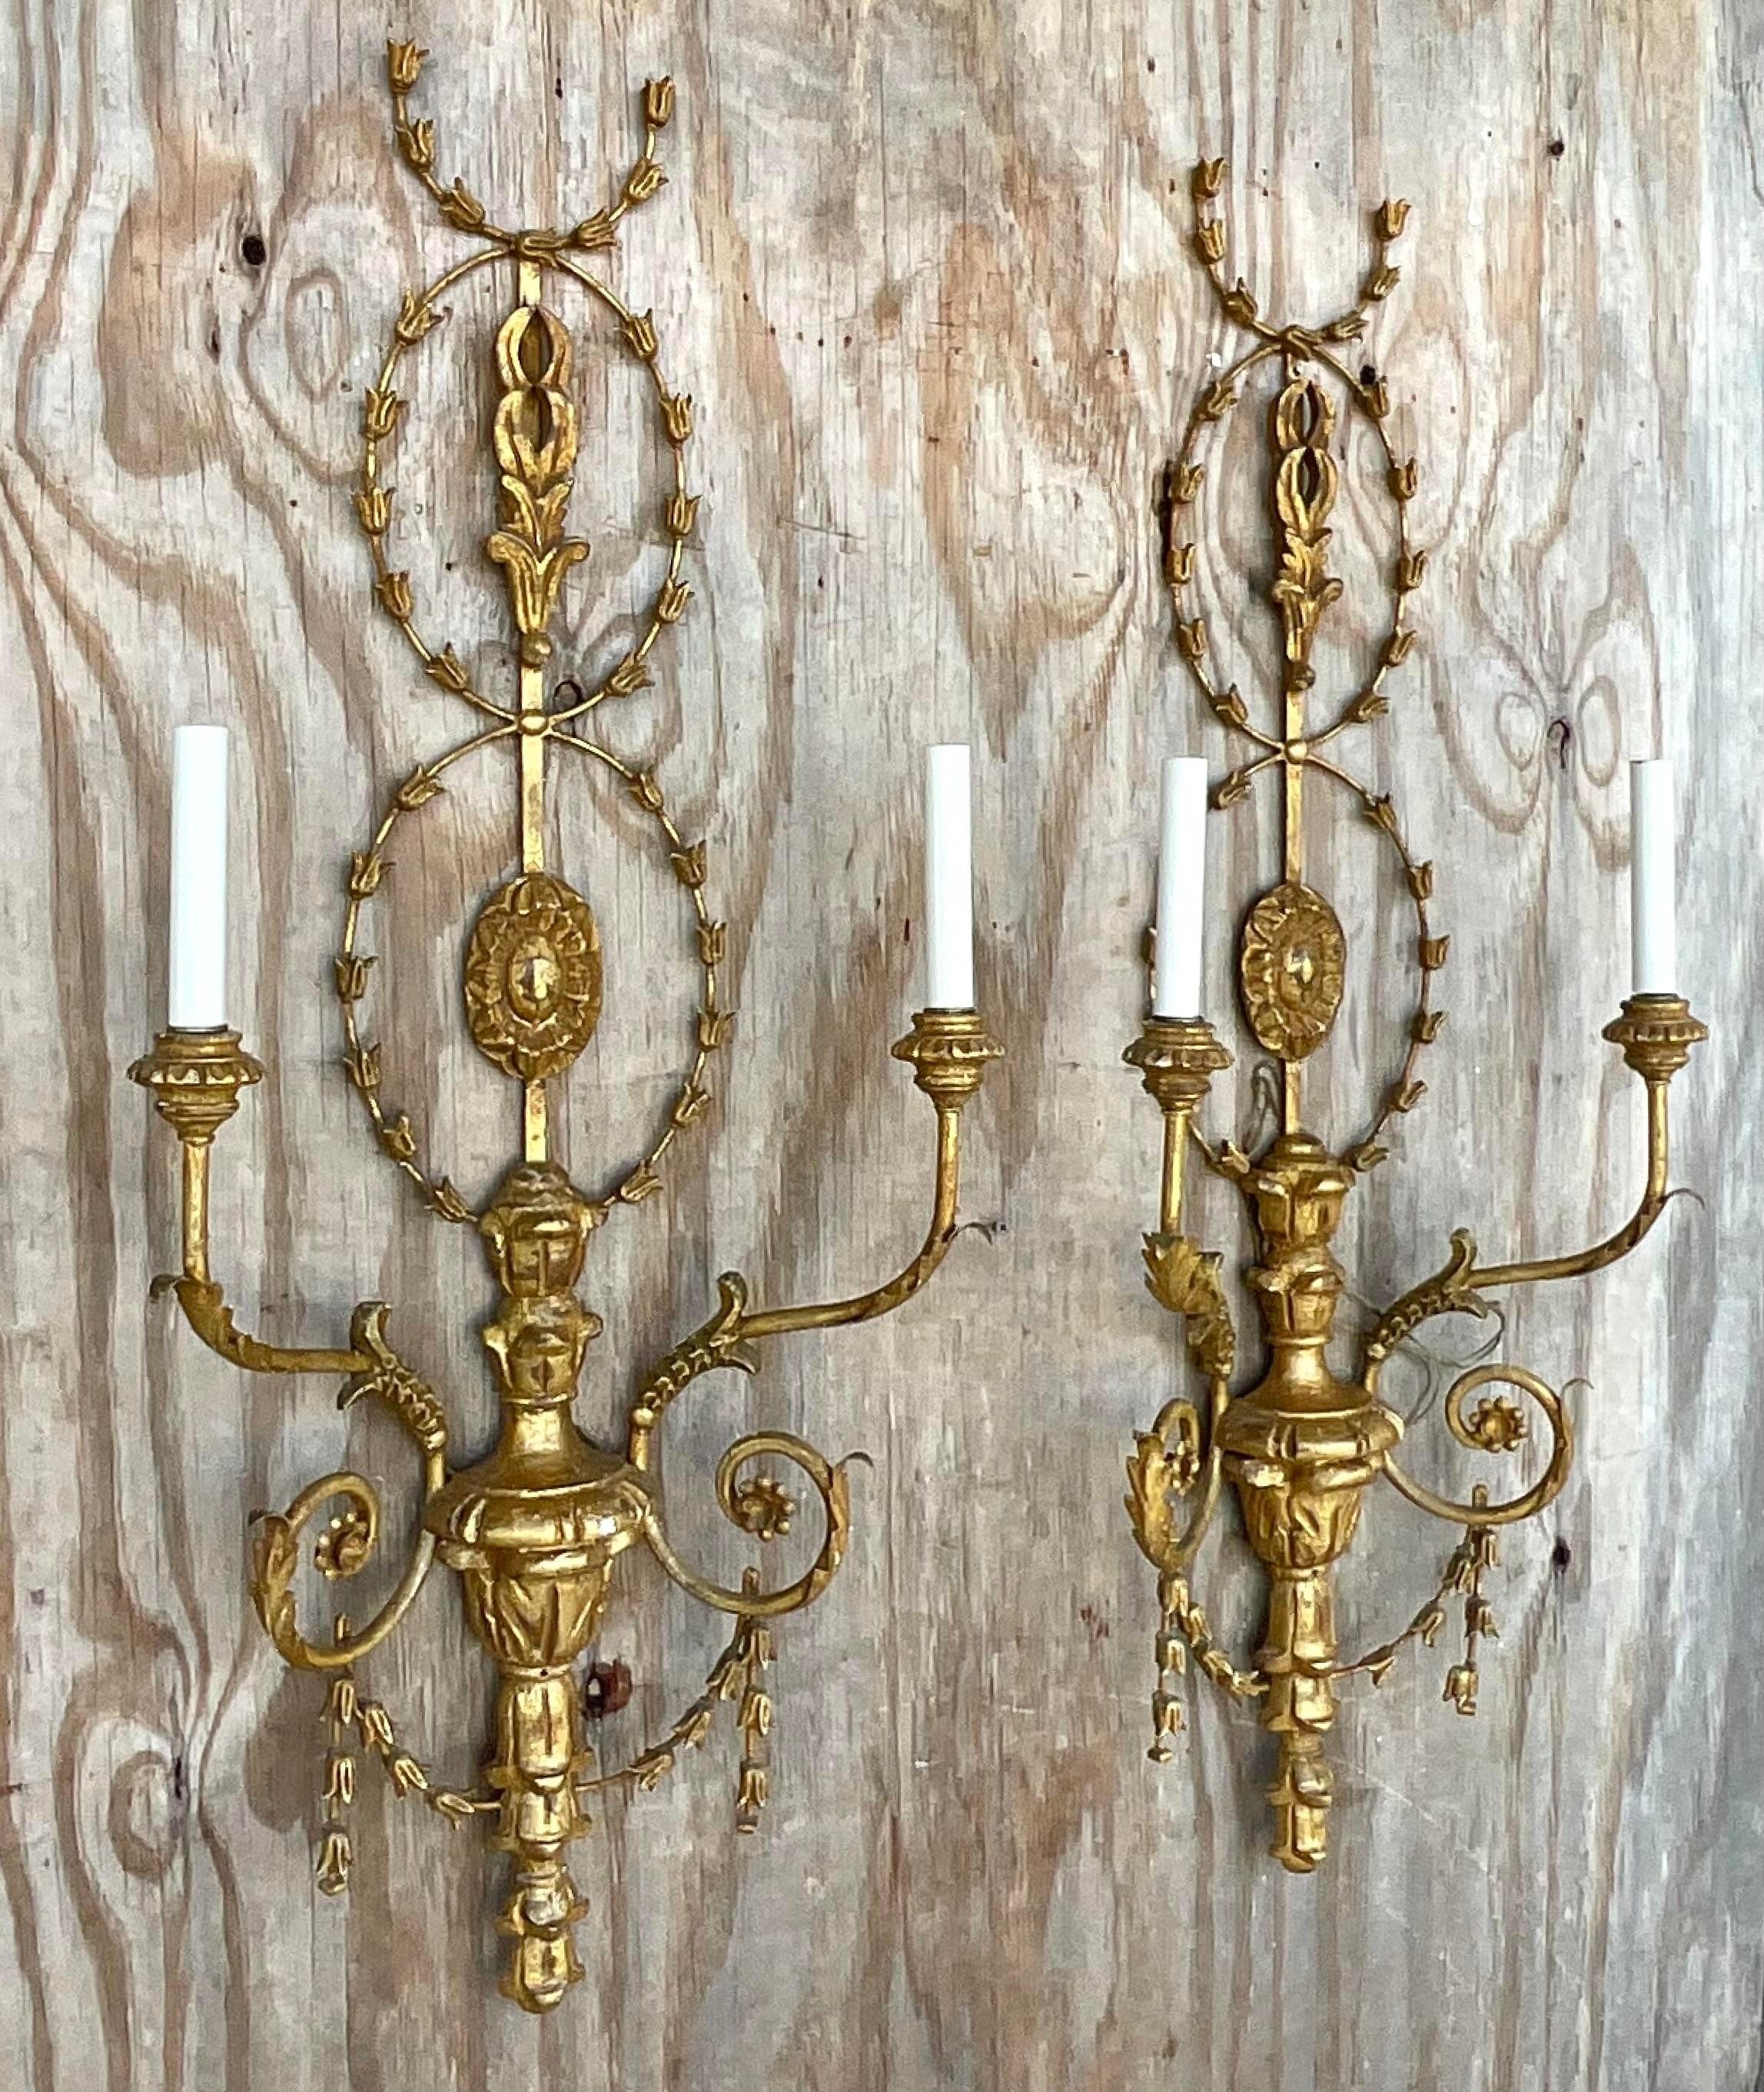 American Vintage Regency Gilt Wood Garland Wall Sconces - a Pair For Sale